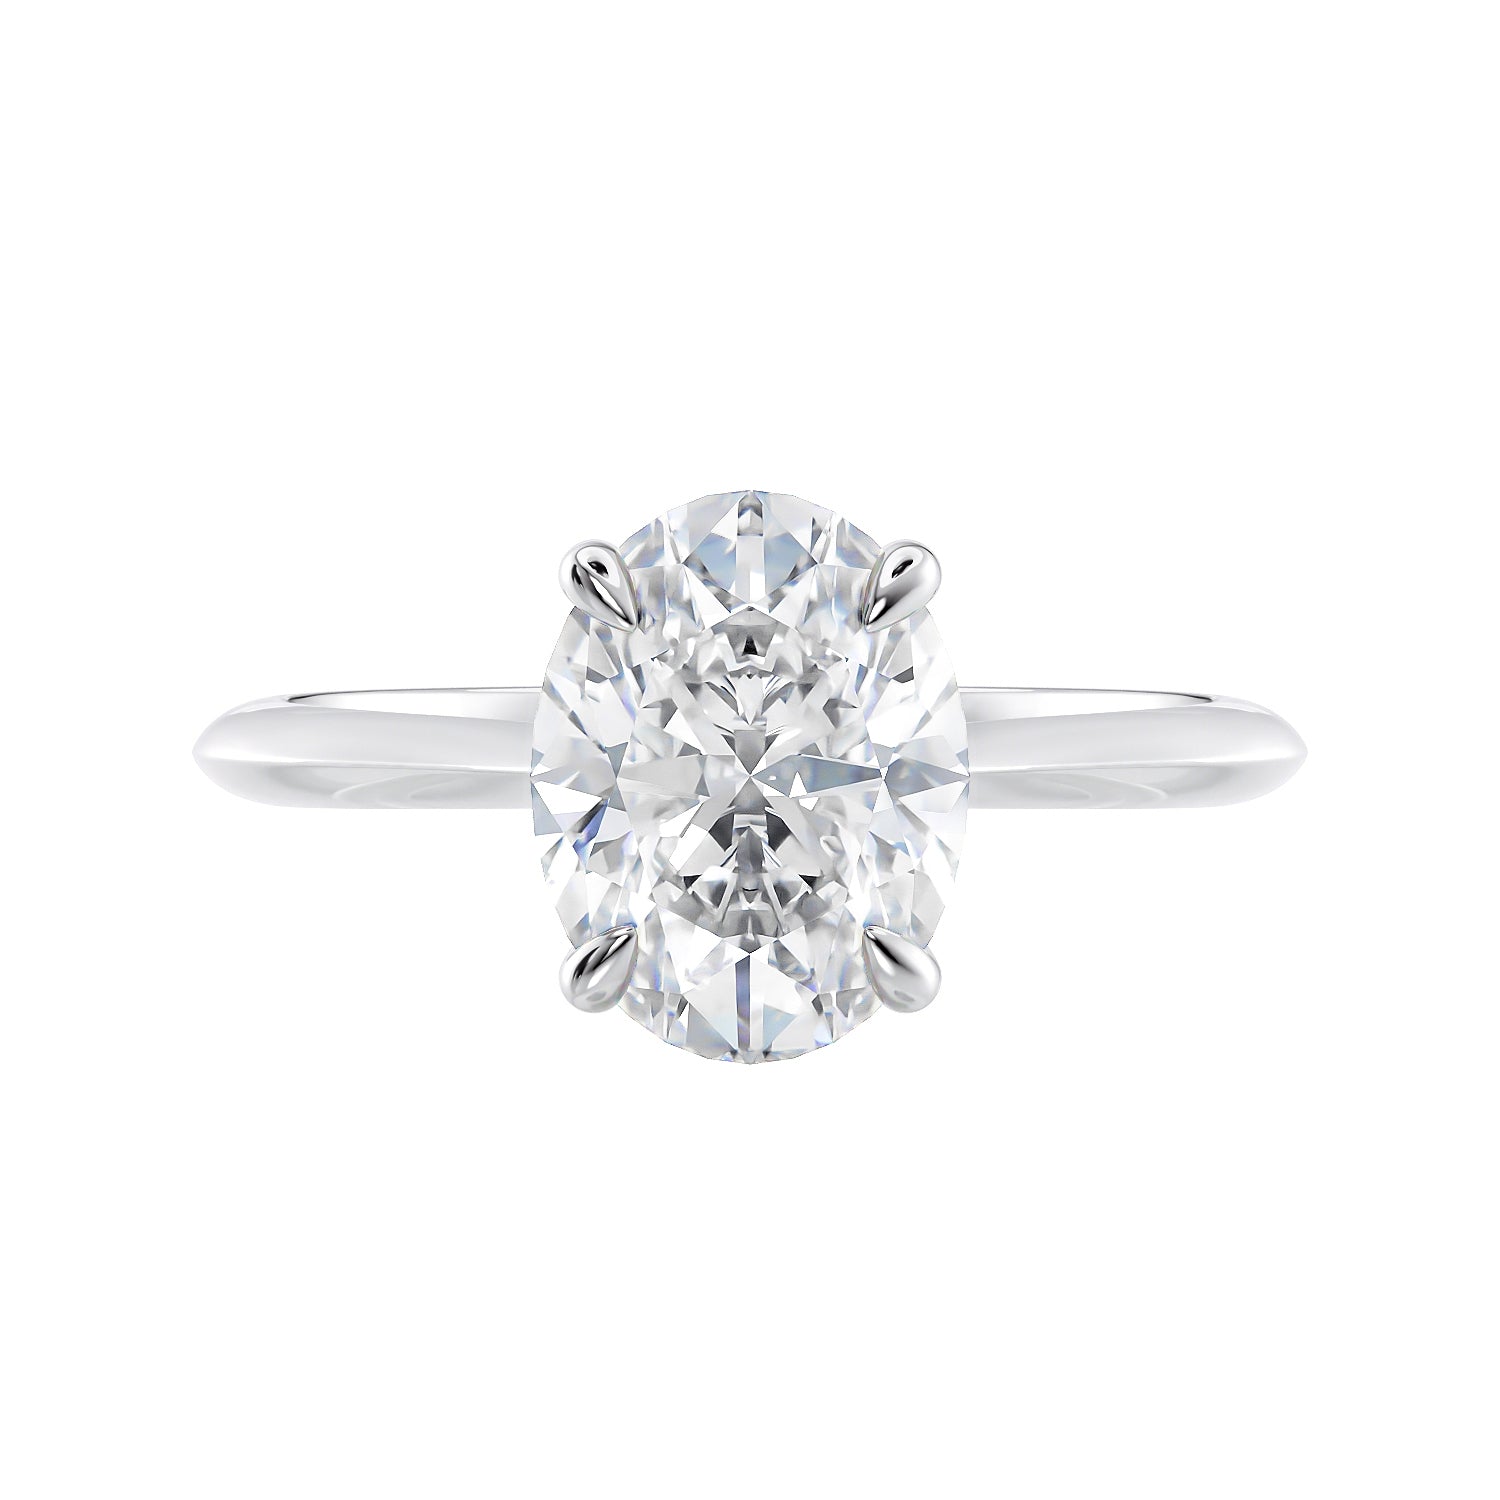 Lab grown diamond oval solitaire engagement ring with hidden halo white gold front view.